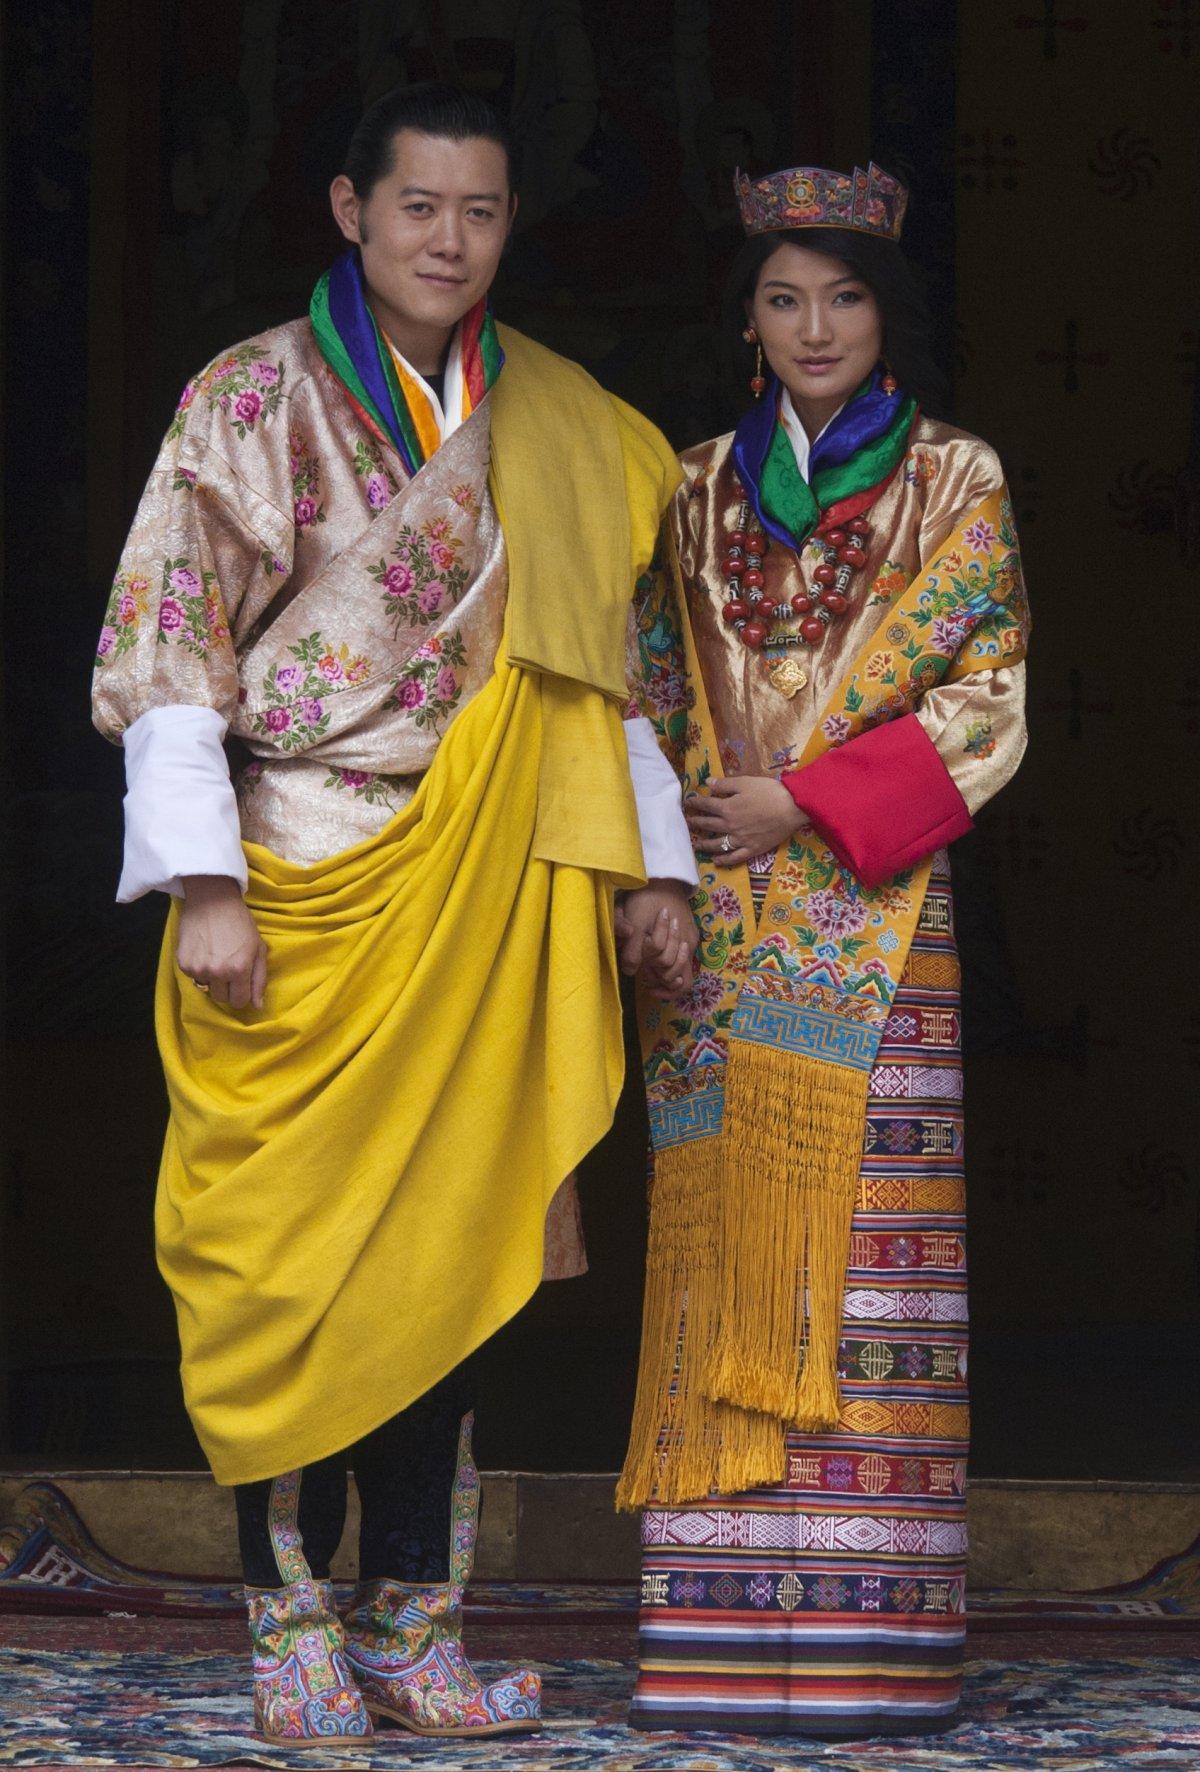 King Jigme Khesar Namgyel Wangchuck and Queen Jetsun Pema pose for pictures after their marriage at the Punkaha Dzong in Bhutan's ancient capital Punakha in 2011.